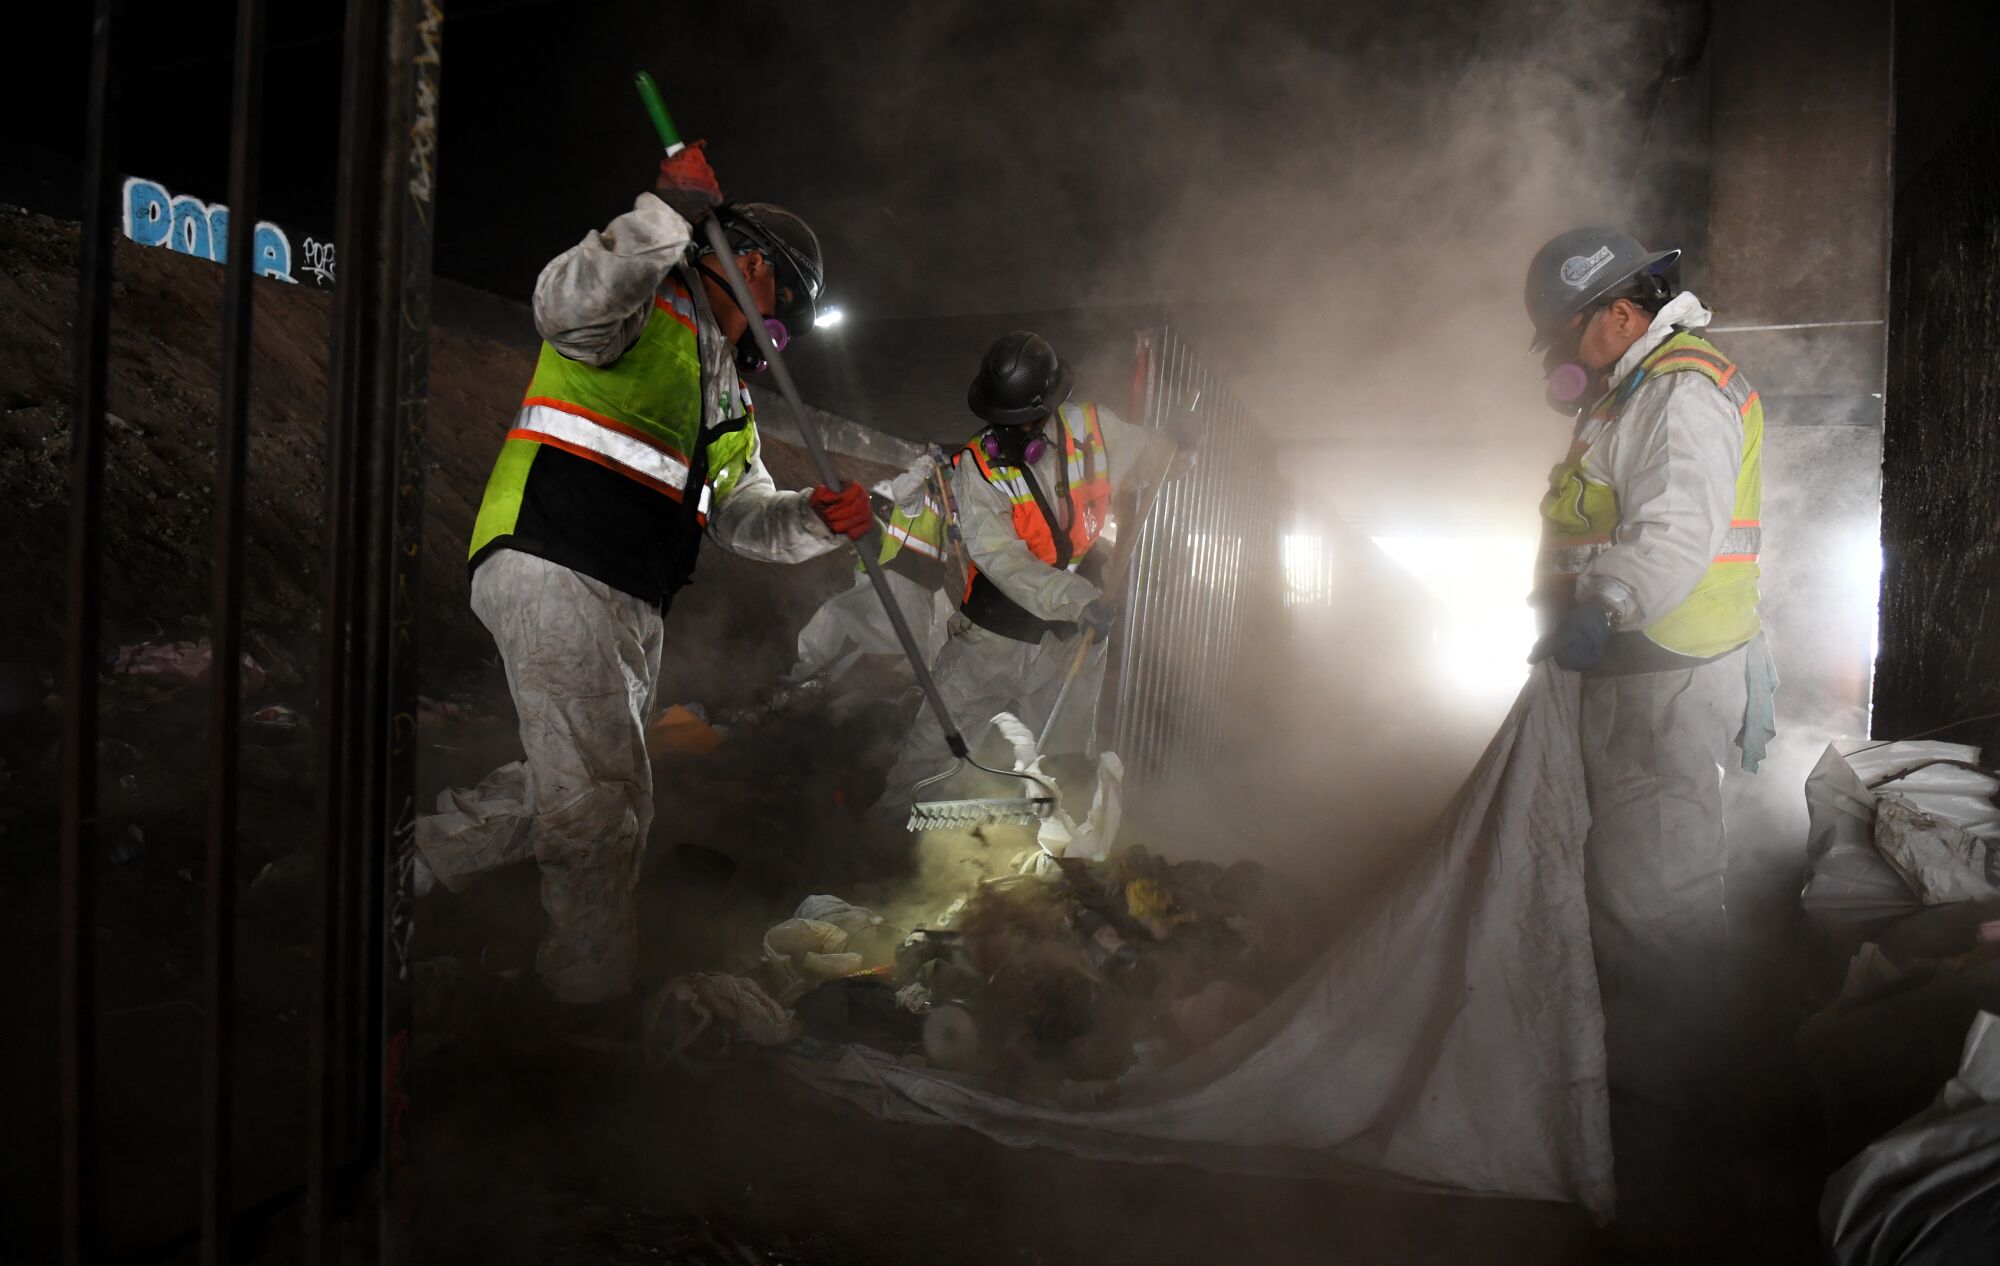 Work crews rake trash and dispose it in a large truck at a homeless encampment.